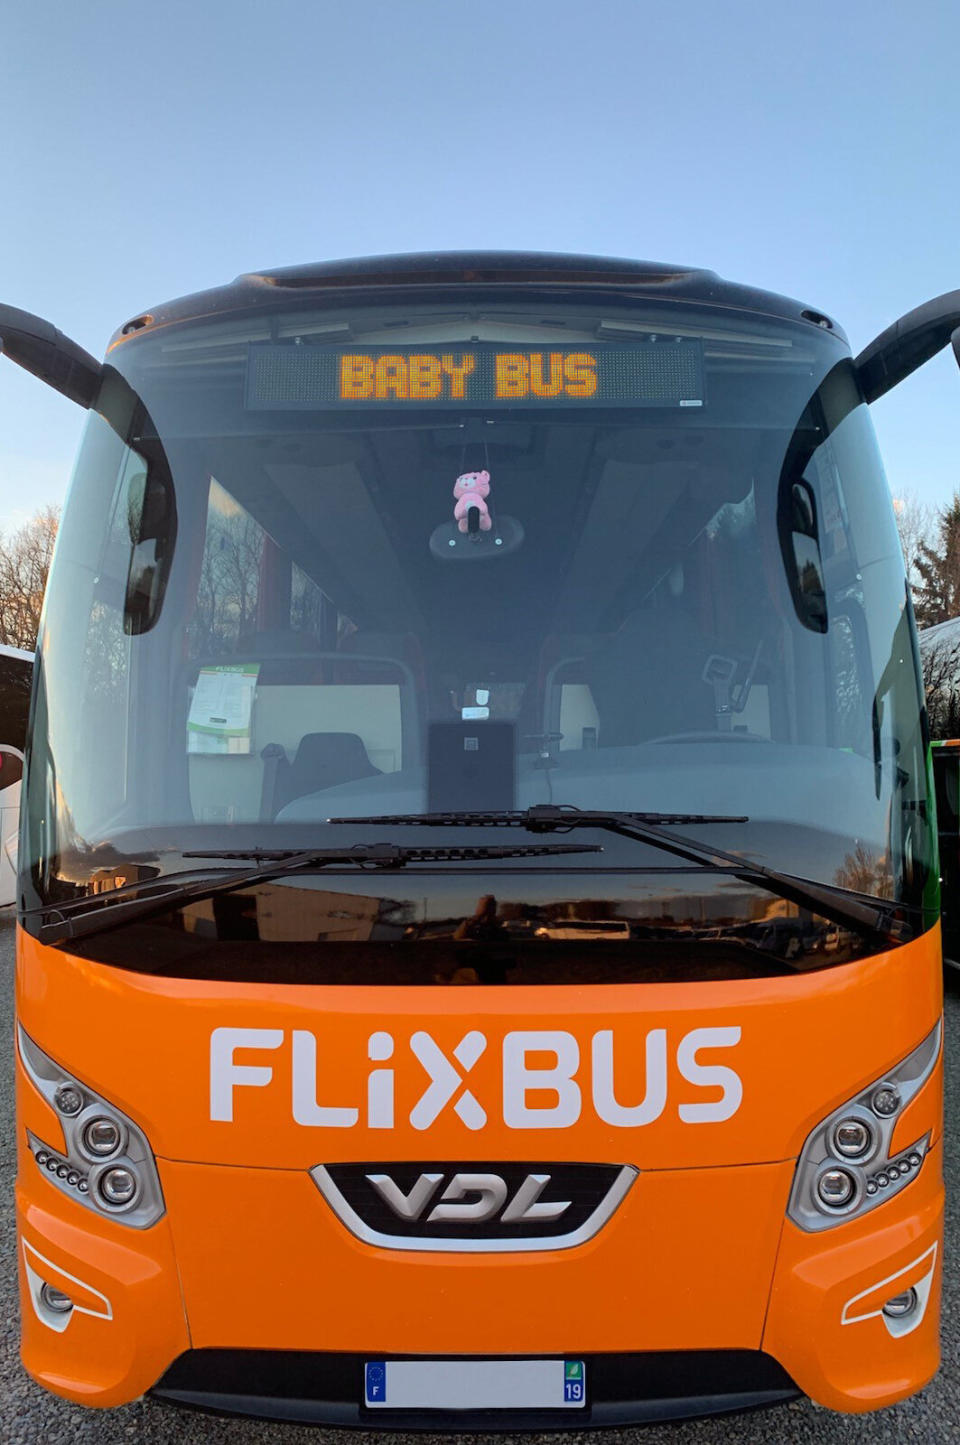 Flixbus reached out to the parents to ensure the baby was healthy before posting about it. (Flixbus)